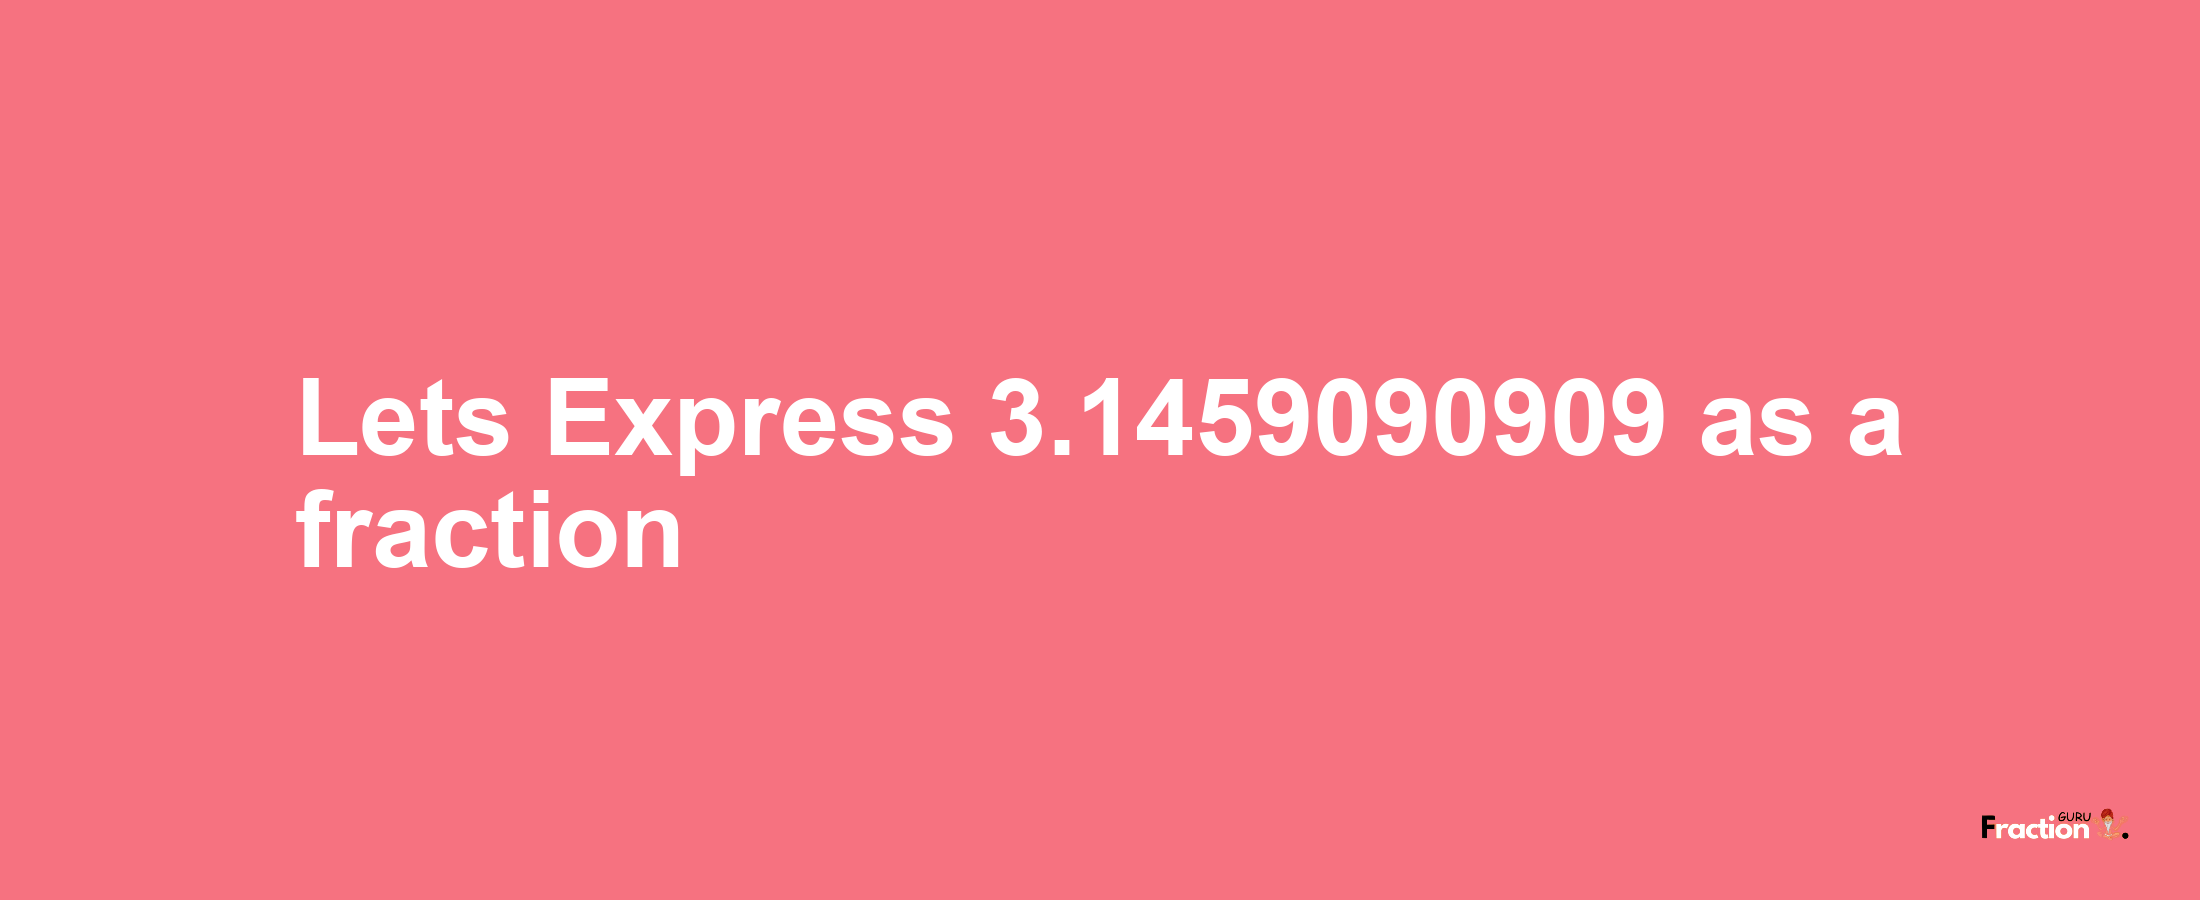 Lets Express 3.1459090909 as afraction